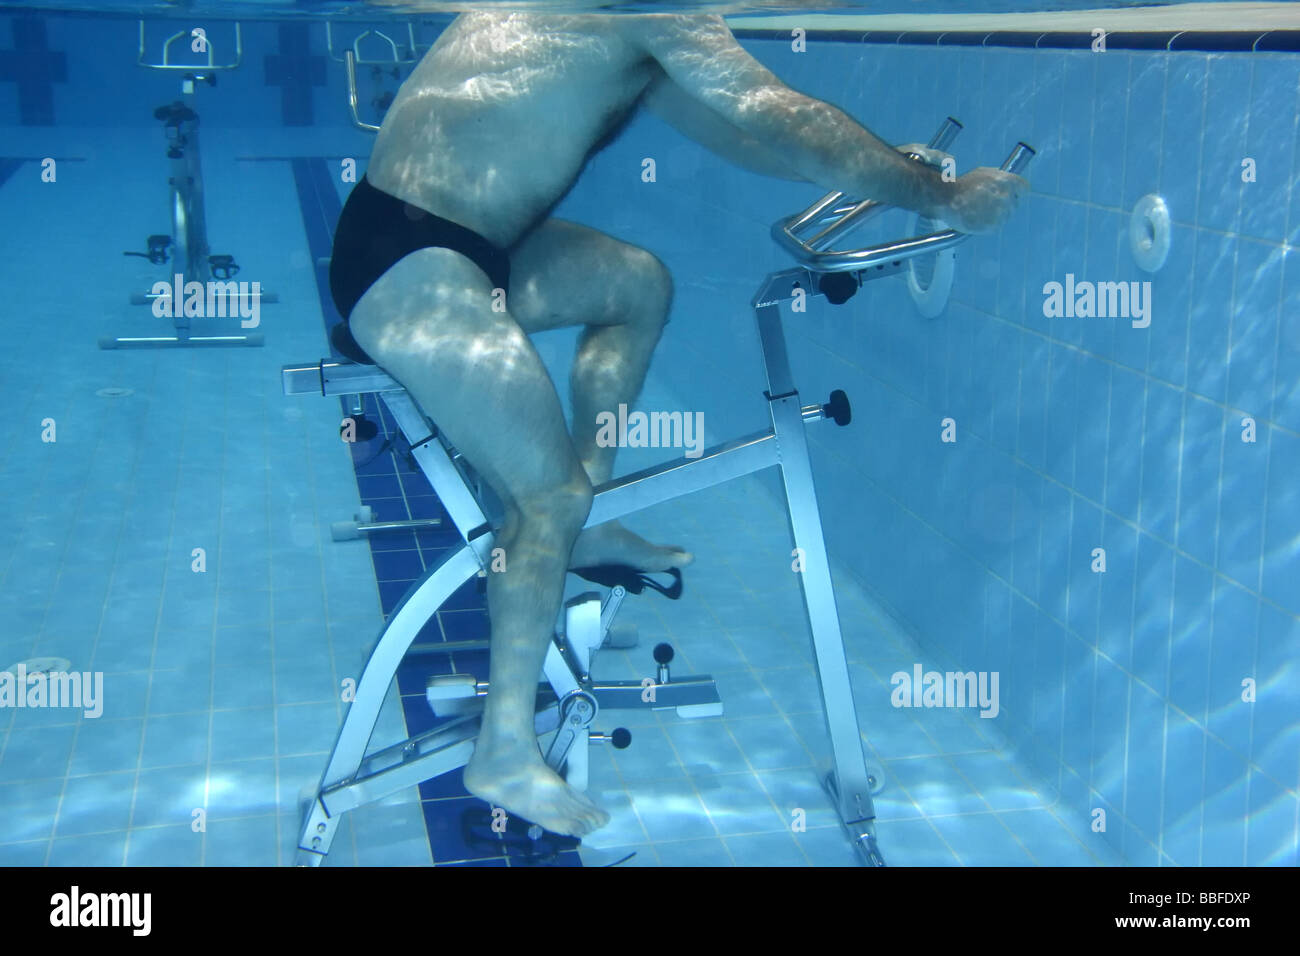 Underwater picture man exercising on a Bycicle Stock Photo